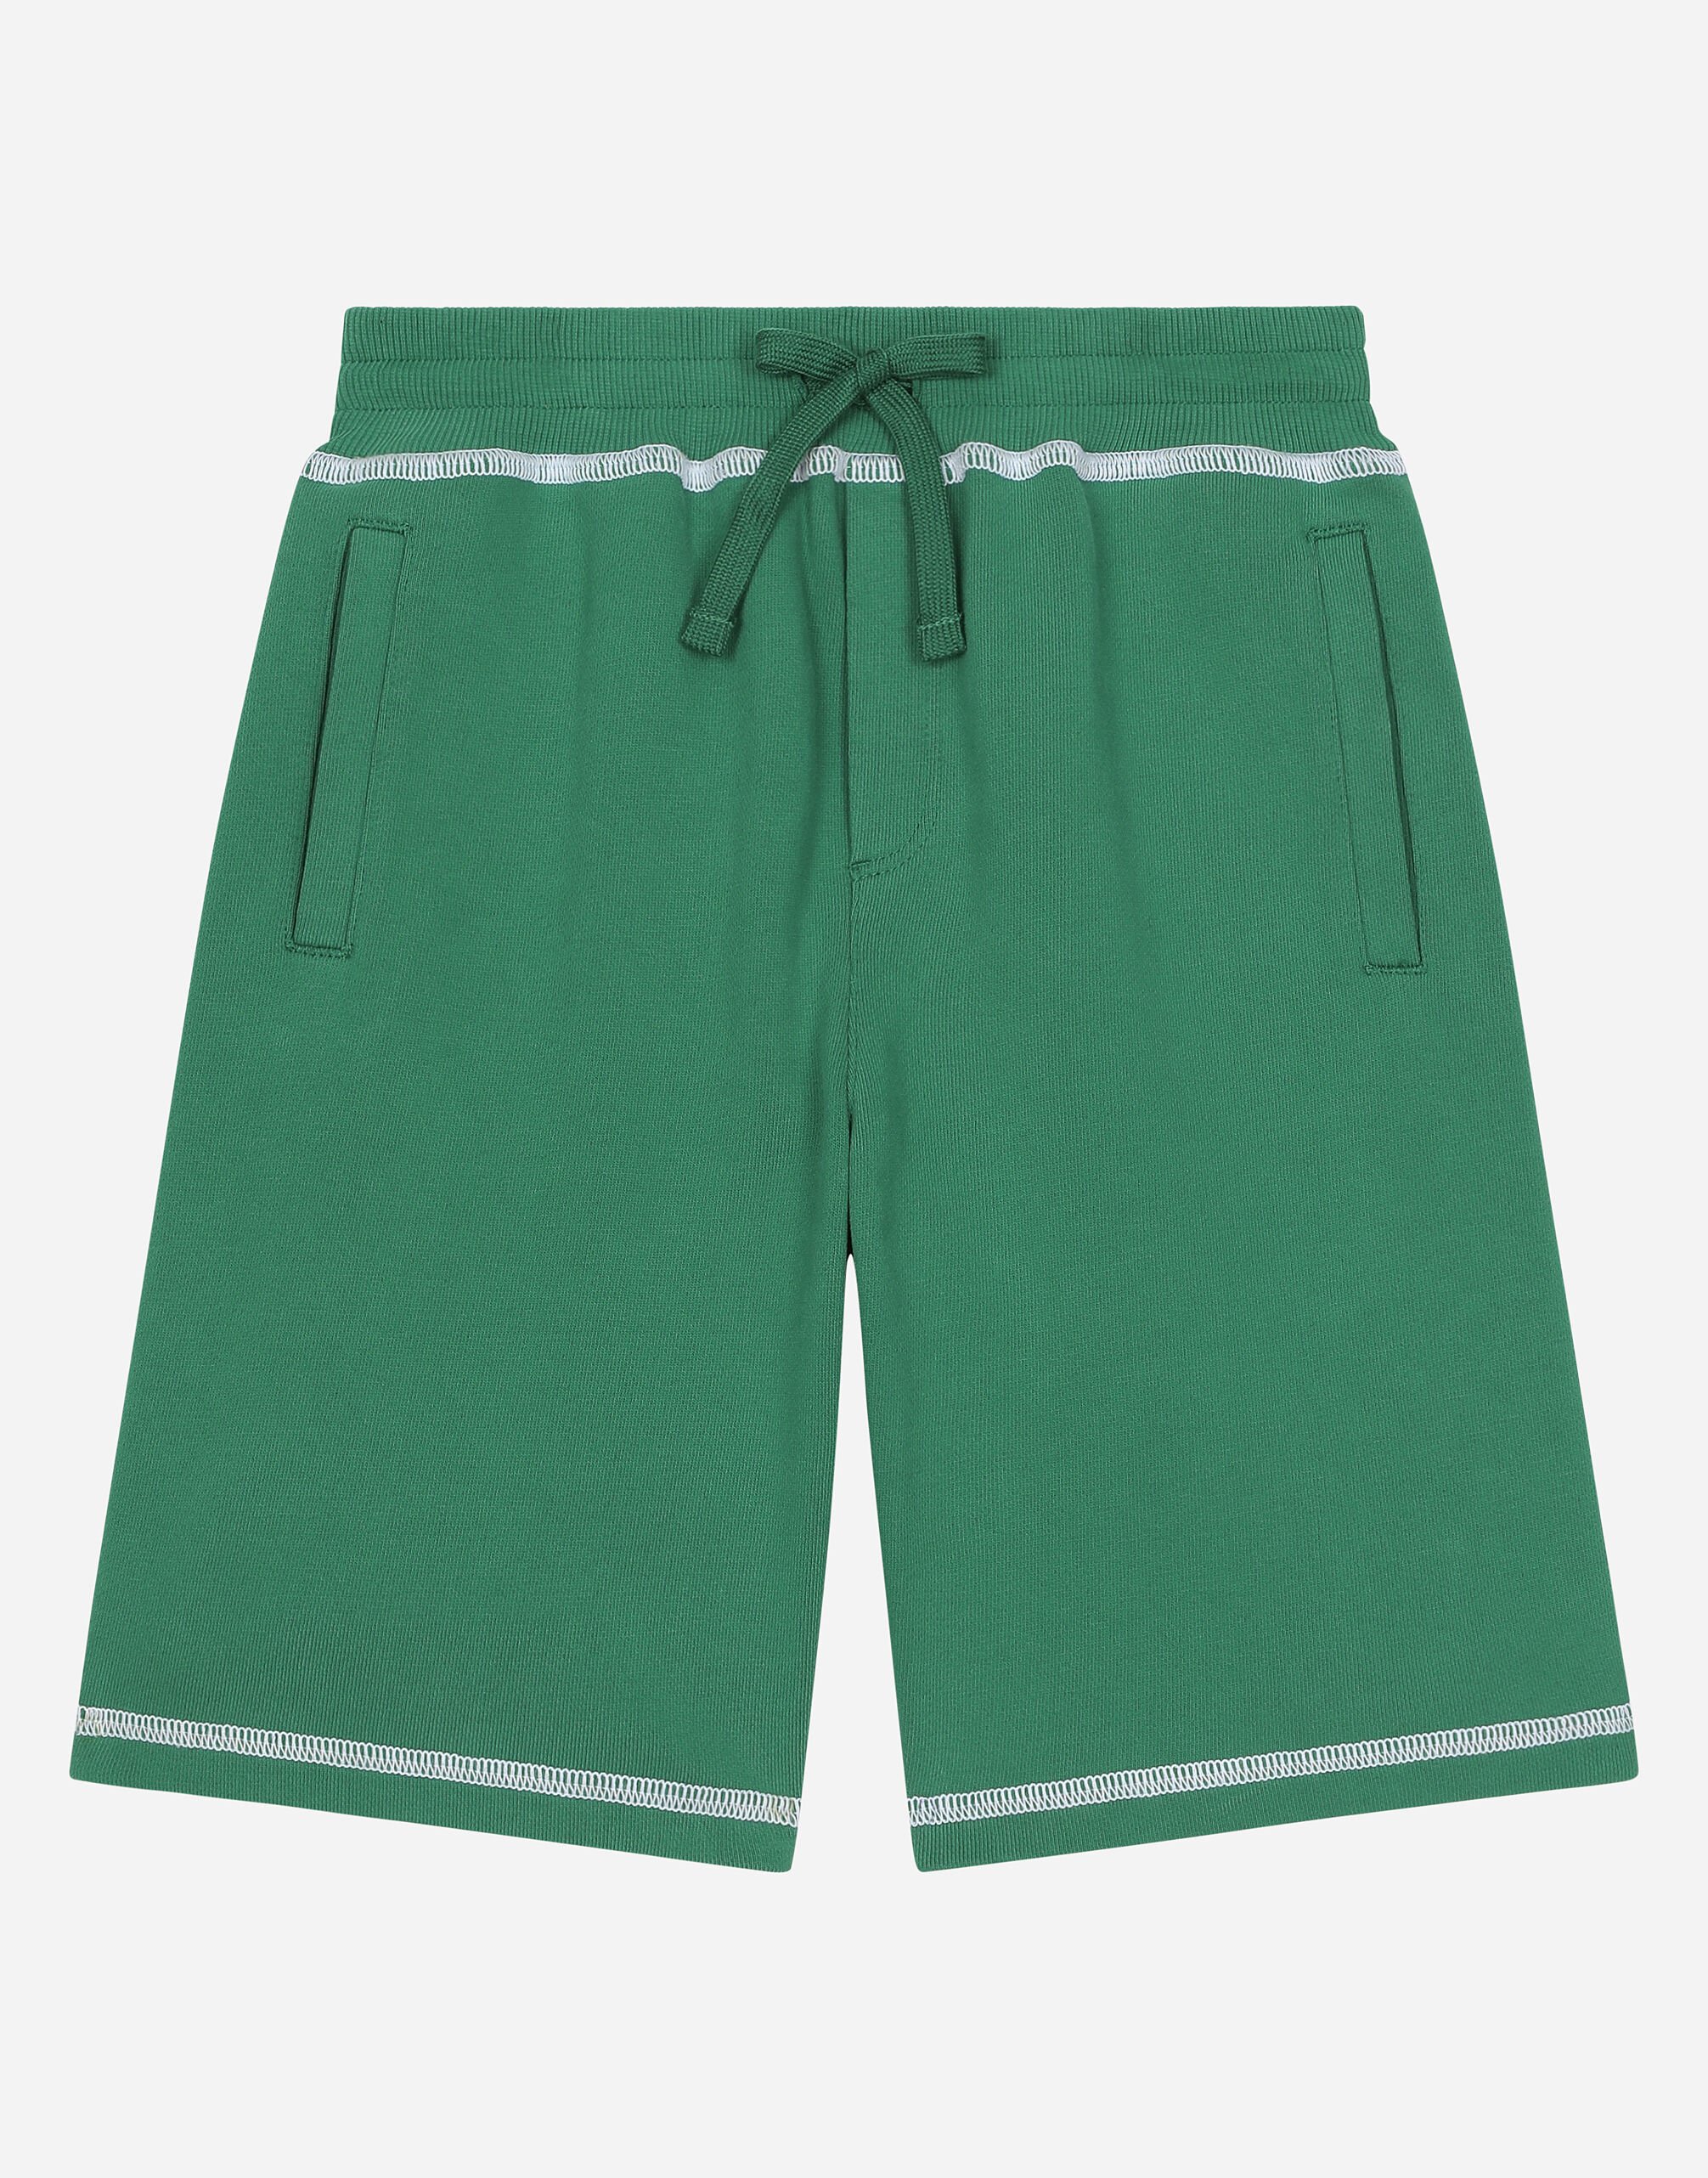 ${brand} Jersey shorts with contrasting stitching and DG logo ${colorDescription} ${masterID}